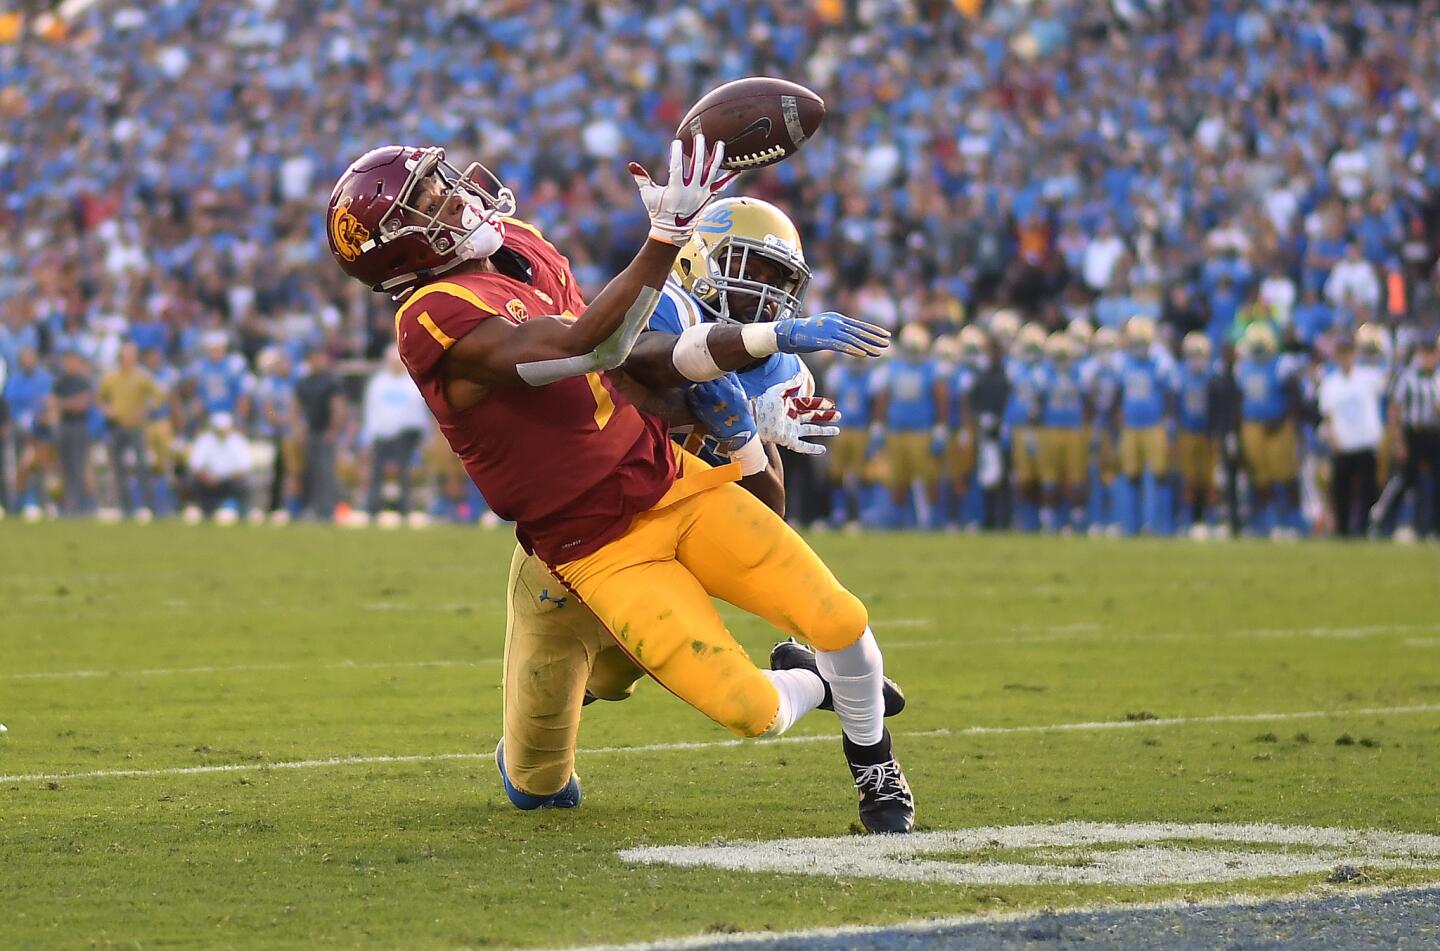 USC receiver Velus Jones Jr. can't make the catch near the end zone as Bruins defensive back Adarius Pickett defends late in the fourth quarter Saturday at the Rose Bowl.